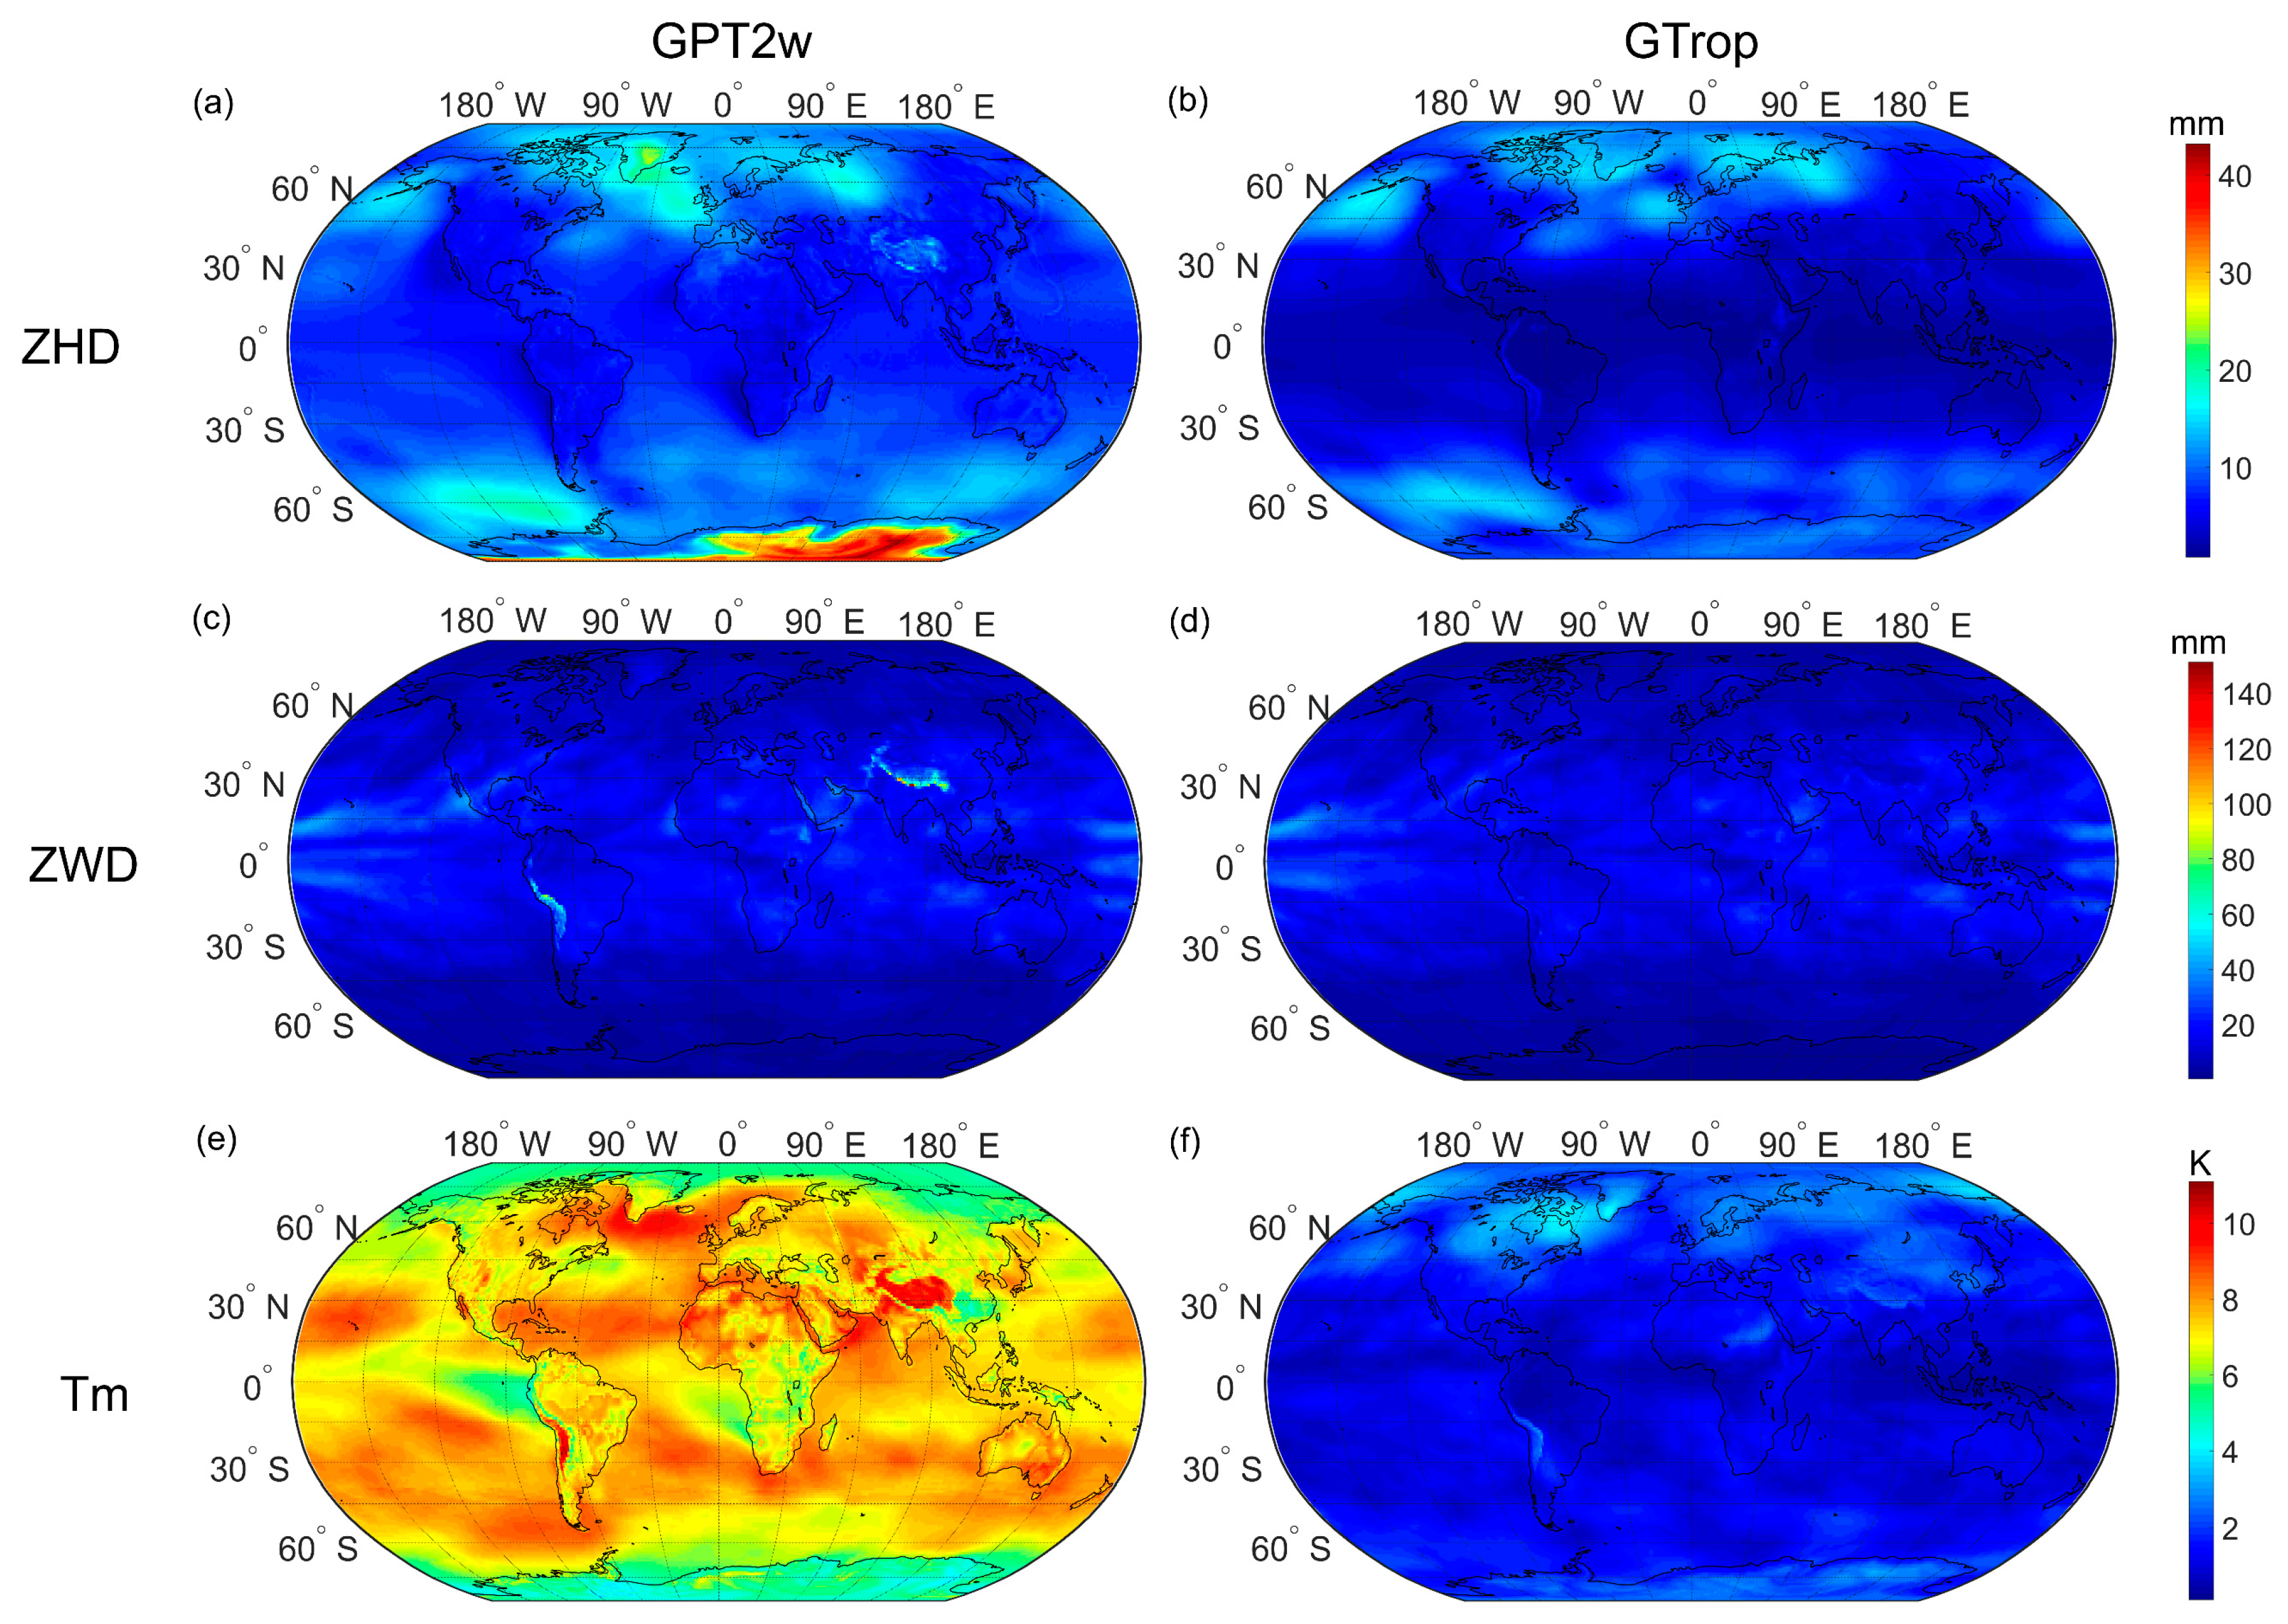 Global RMS of GTrop and GPT2w validated by ECMWF data